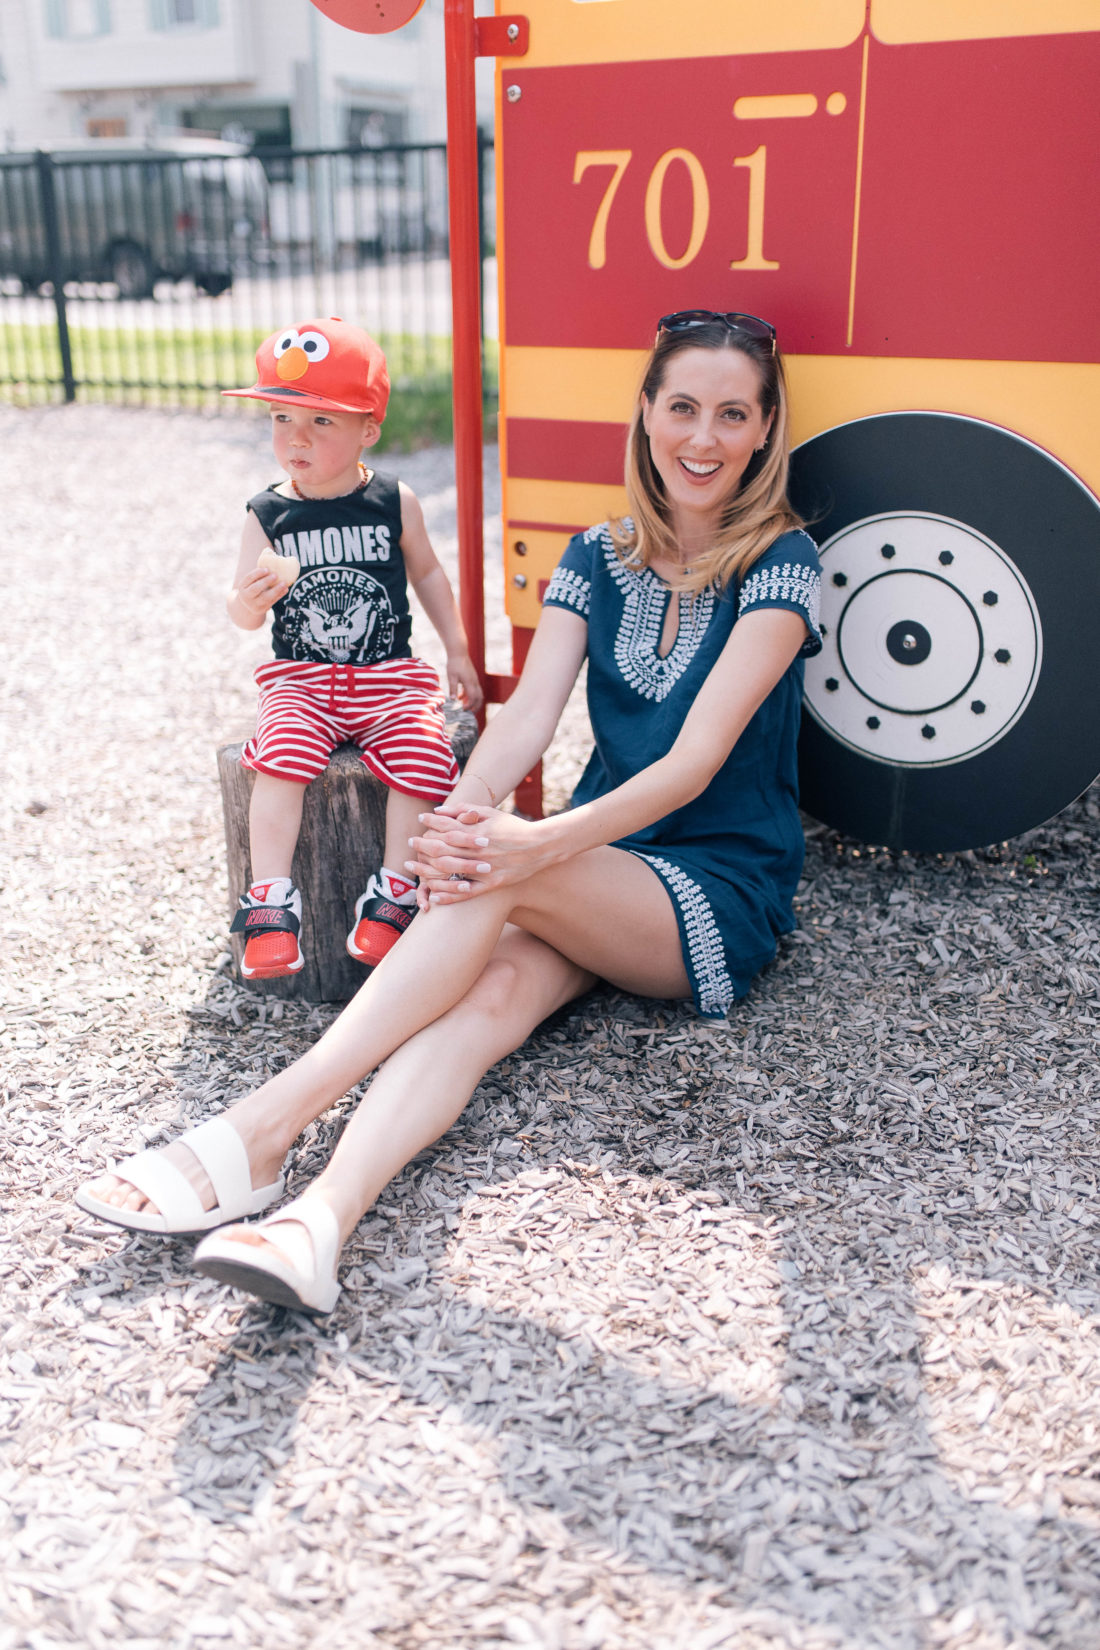 Eva Amurri Martino sits on the ground wearing a navy blue dress, while son Major snacks on a stool next to her